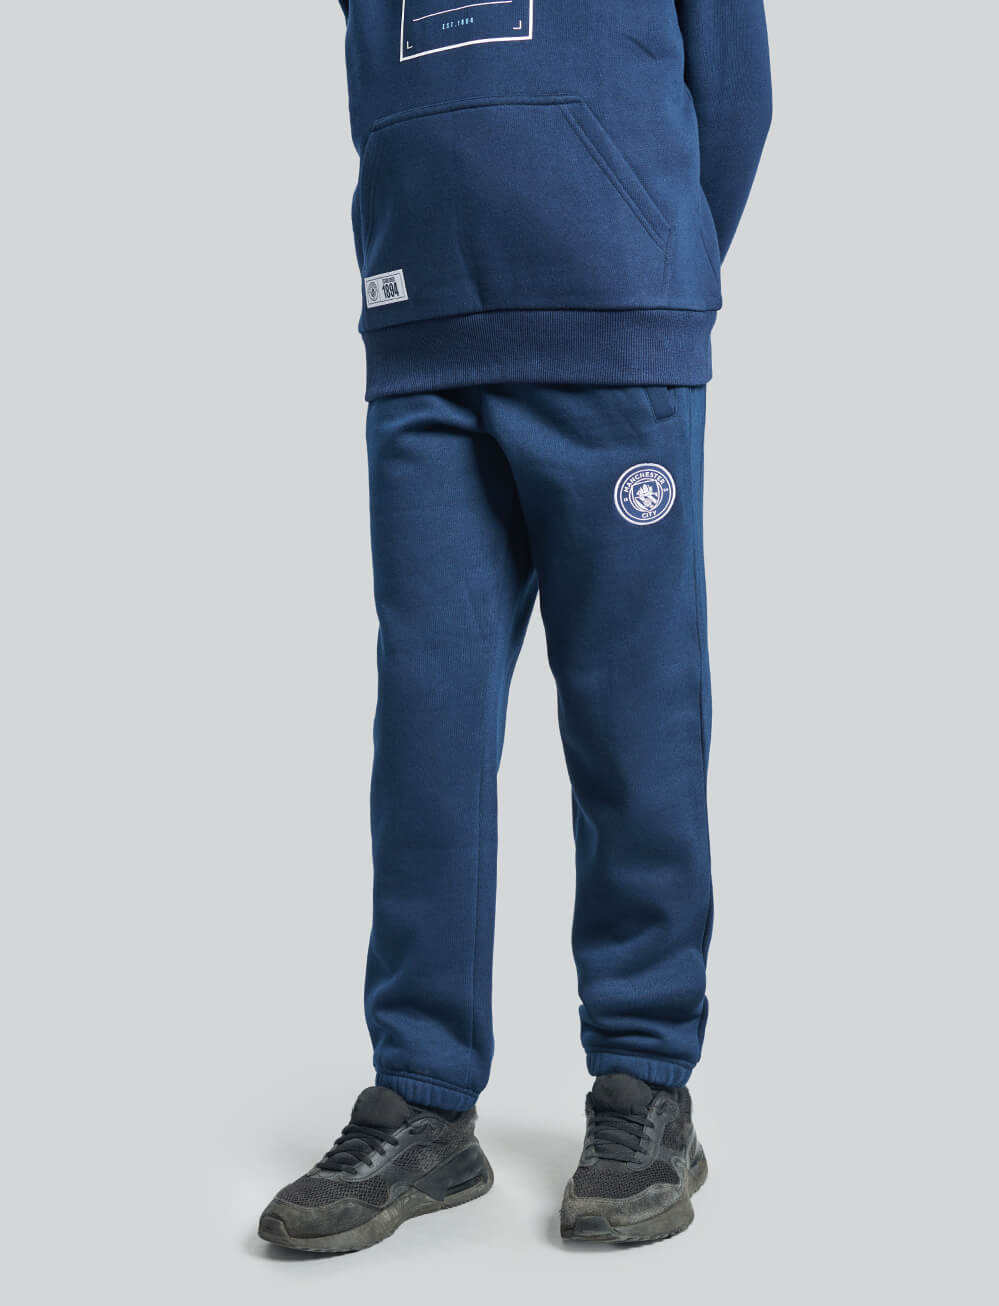 Official Manchester City Kids Joggers - Navy - The World Football Store